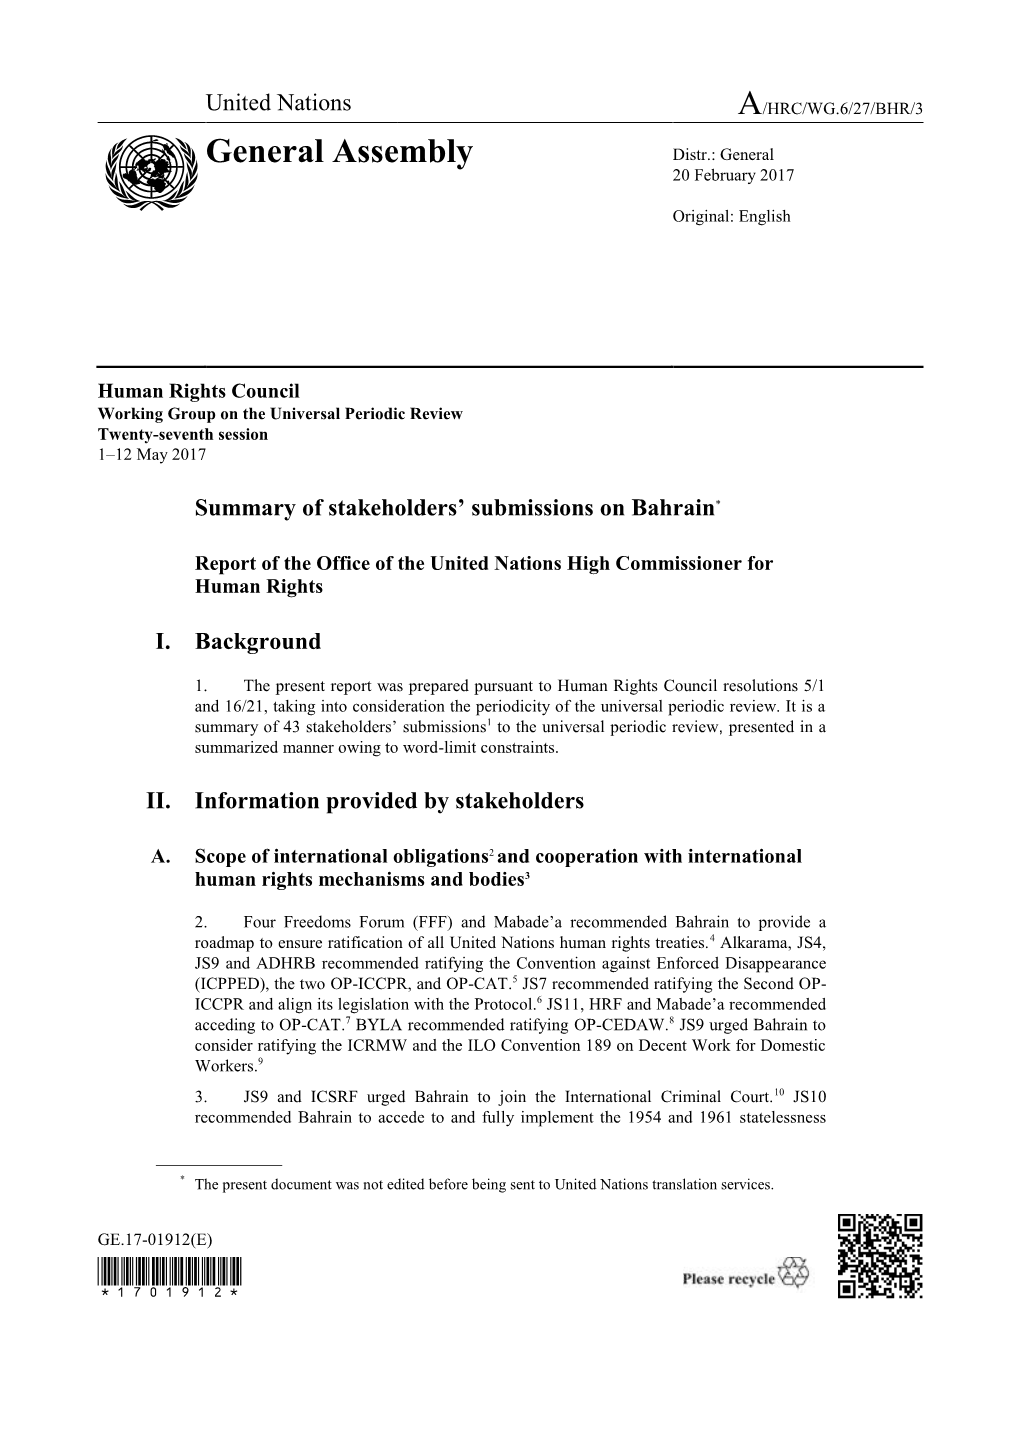 Page 1 GE.17-01912(E) Human Rights Council Working Group On